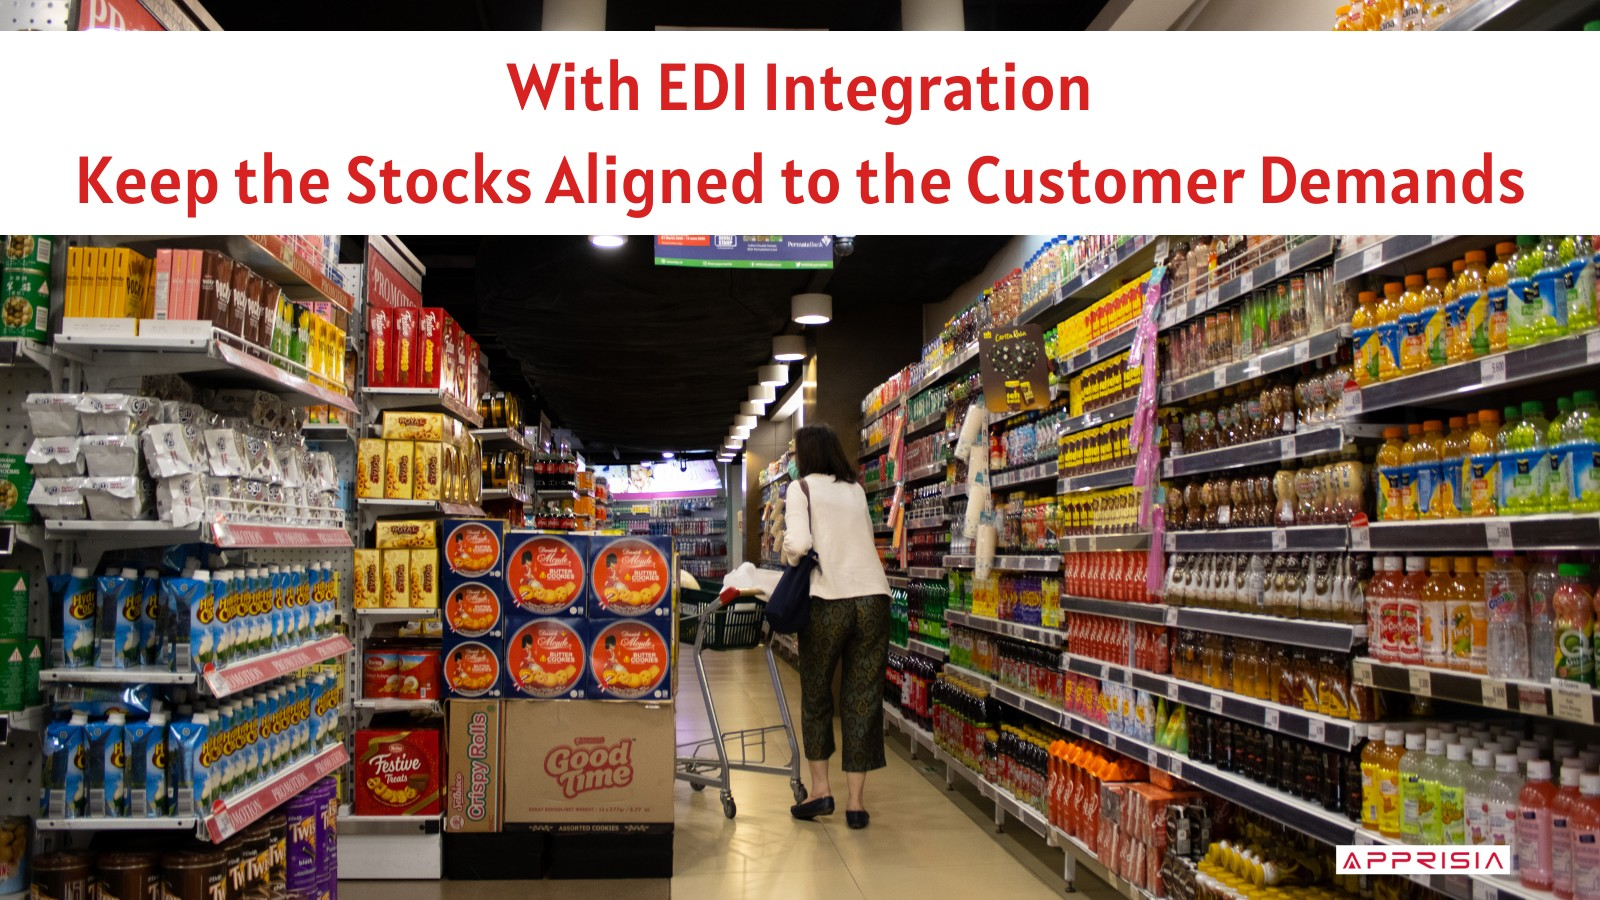 EDI Integration for the Retail, Logistics, and Distribution industry